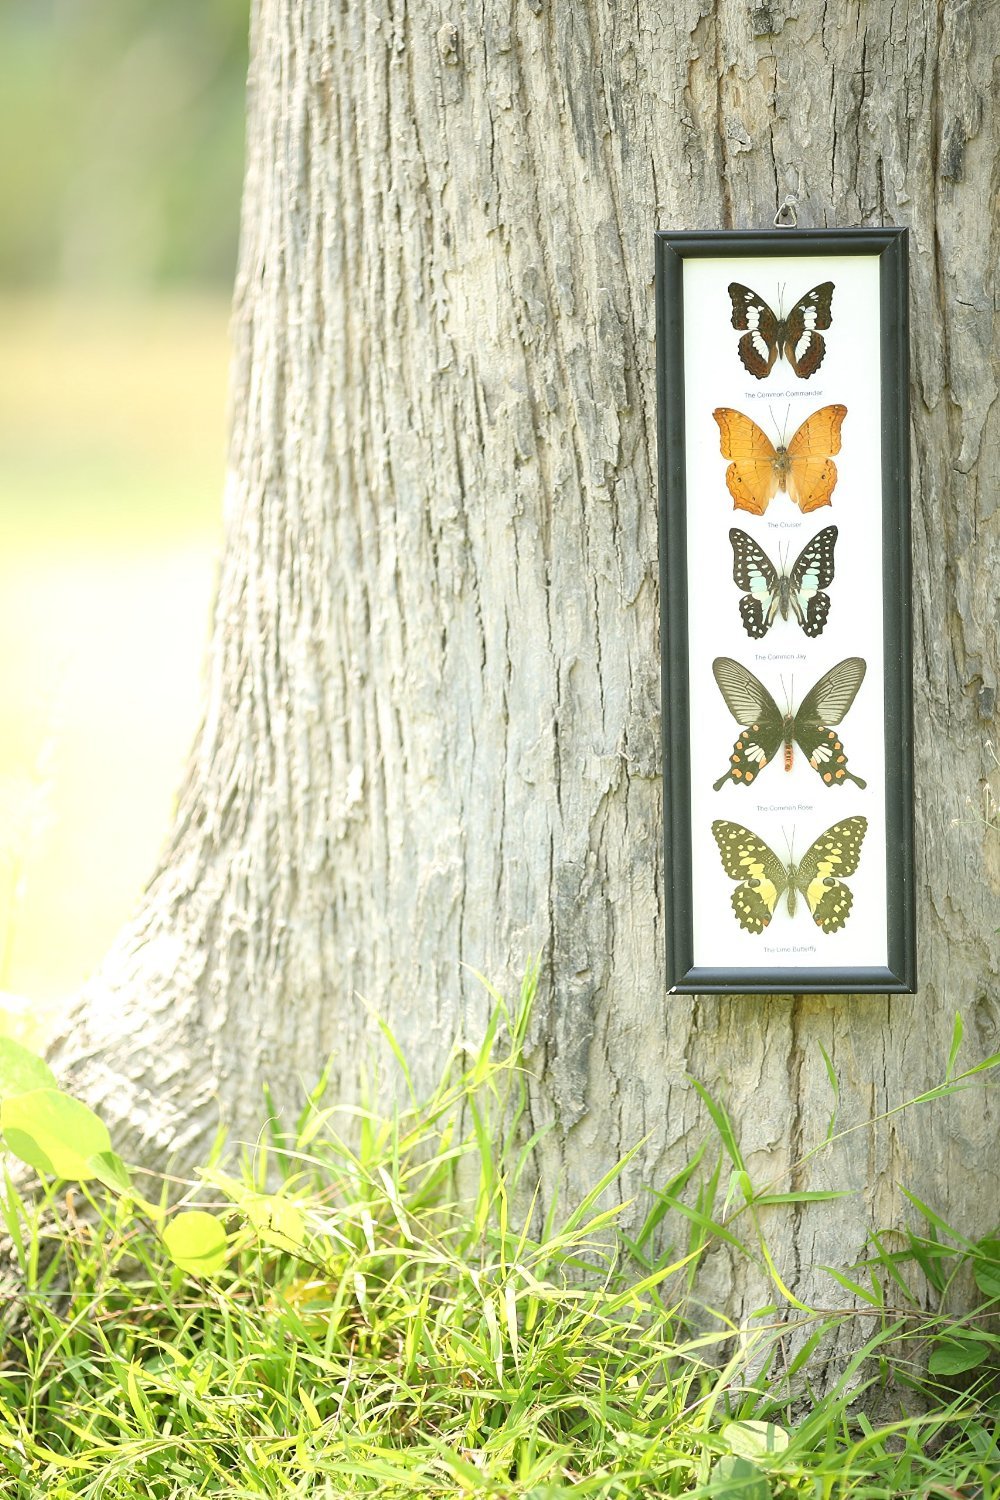 FIVE FRAMED BUTTERFLIES, Real Butterflies Mounted Under Glass, Wall Hanging Frame 18 x 6 In. Gift Boxed